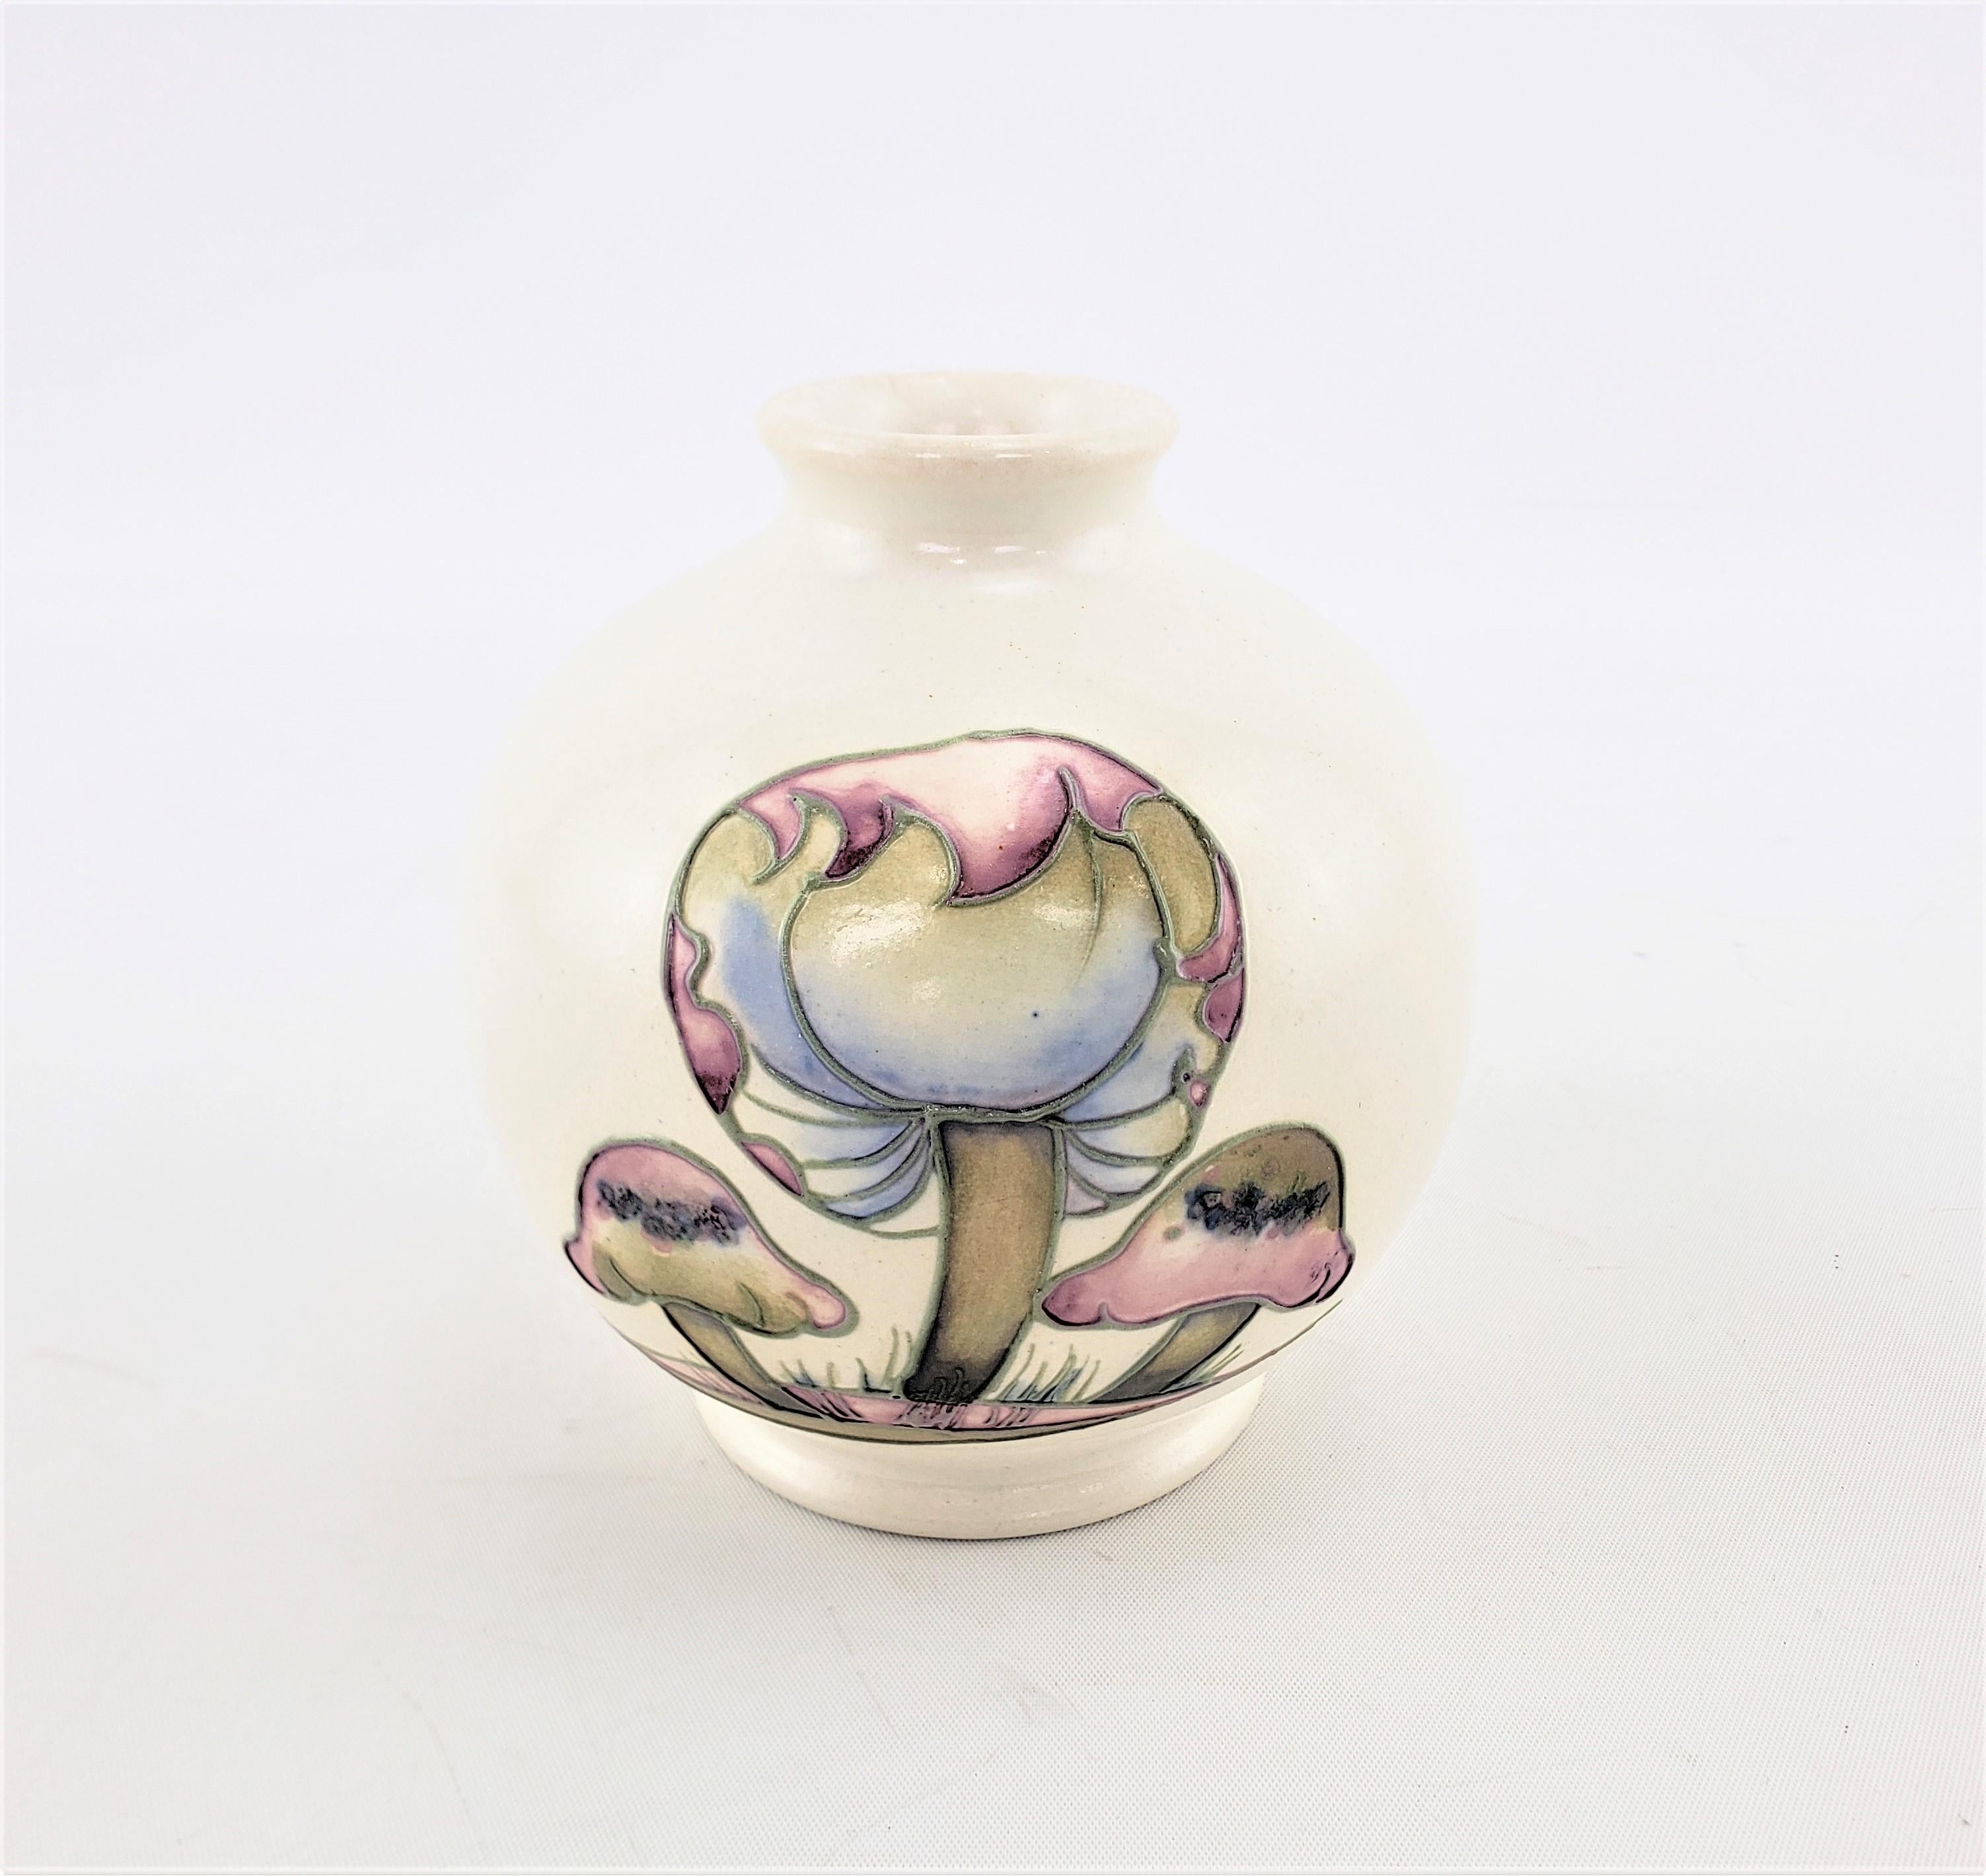 This small bulbous shaped art pottery vase was done by William Moorcroft of England in approximately 1920 in a period amArt Deco style. The vase is done with a white salt glaze ground in the ‘Claremont’ pattern in muted pastel tones and the